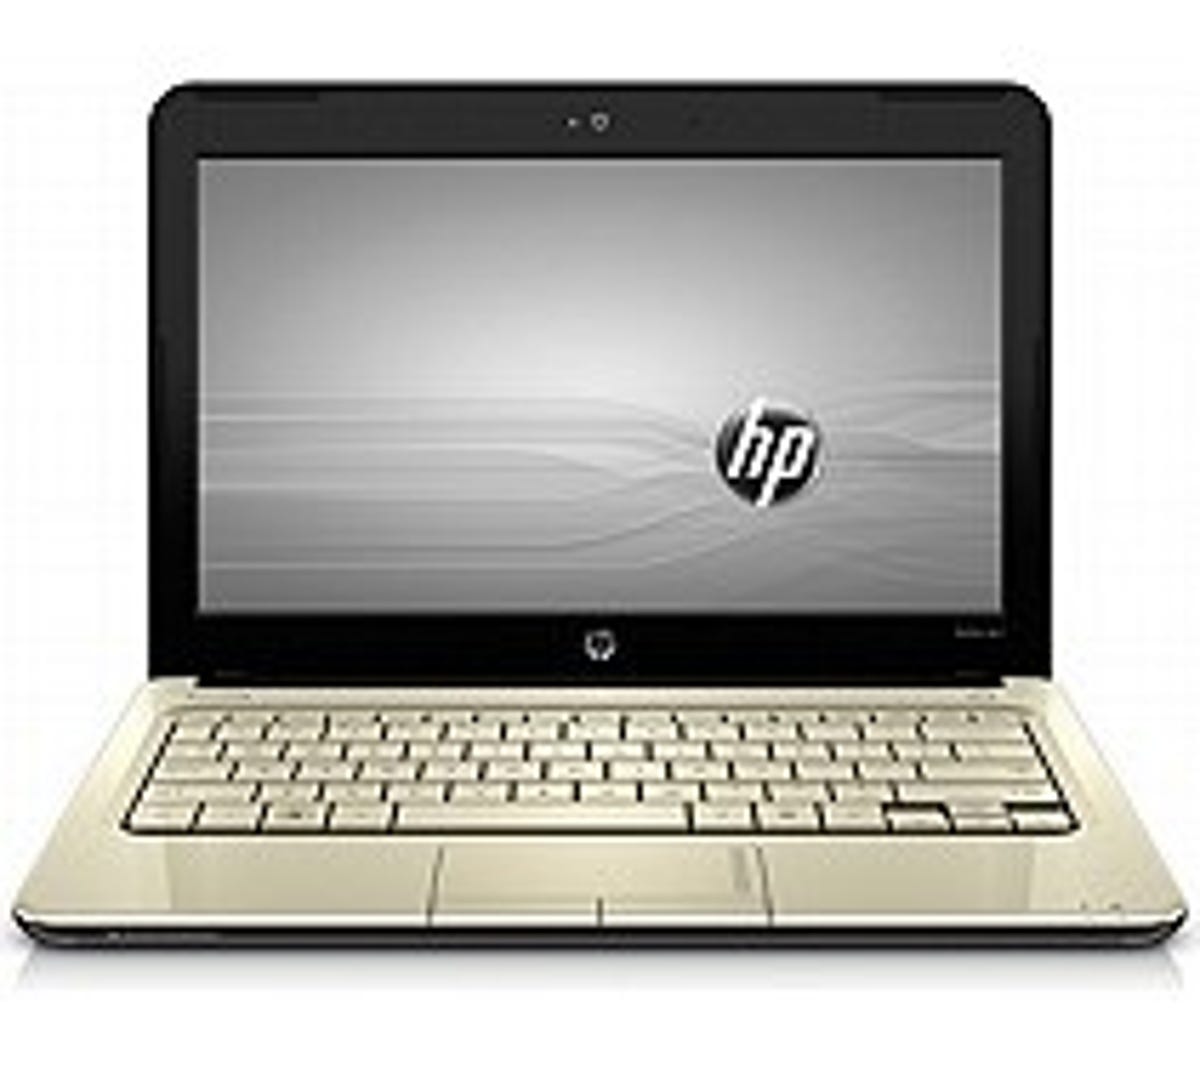 Currently-available HP Pavilion dm1z ultraportable features AMD processors and an 11.6-inch design.